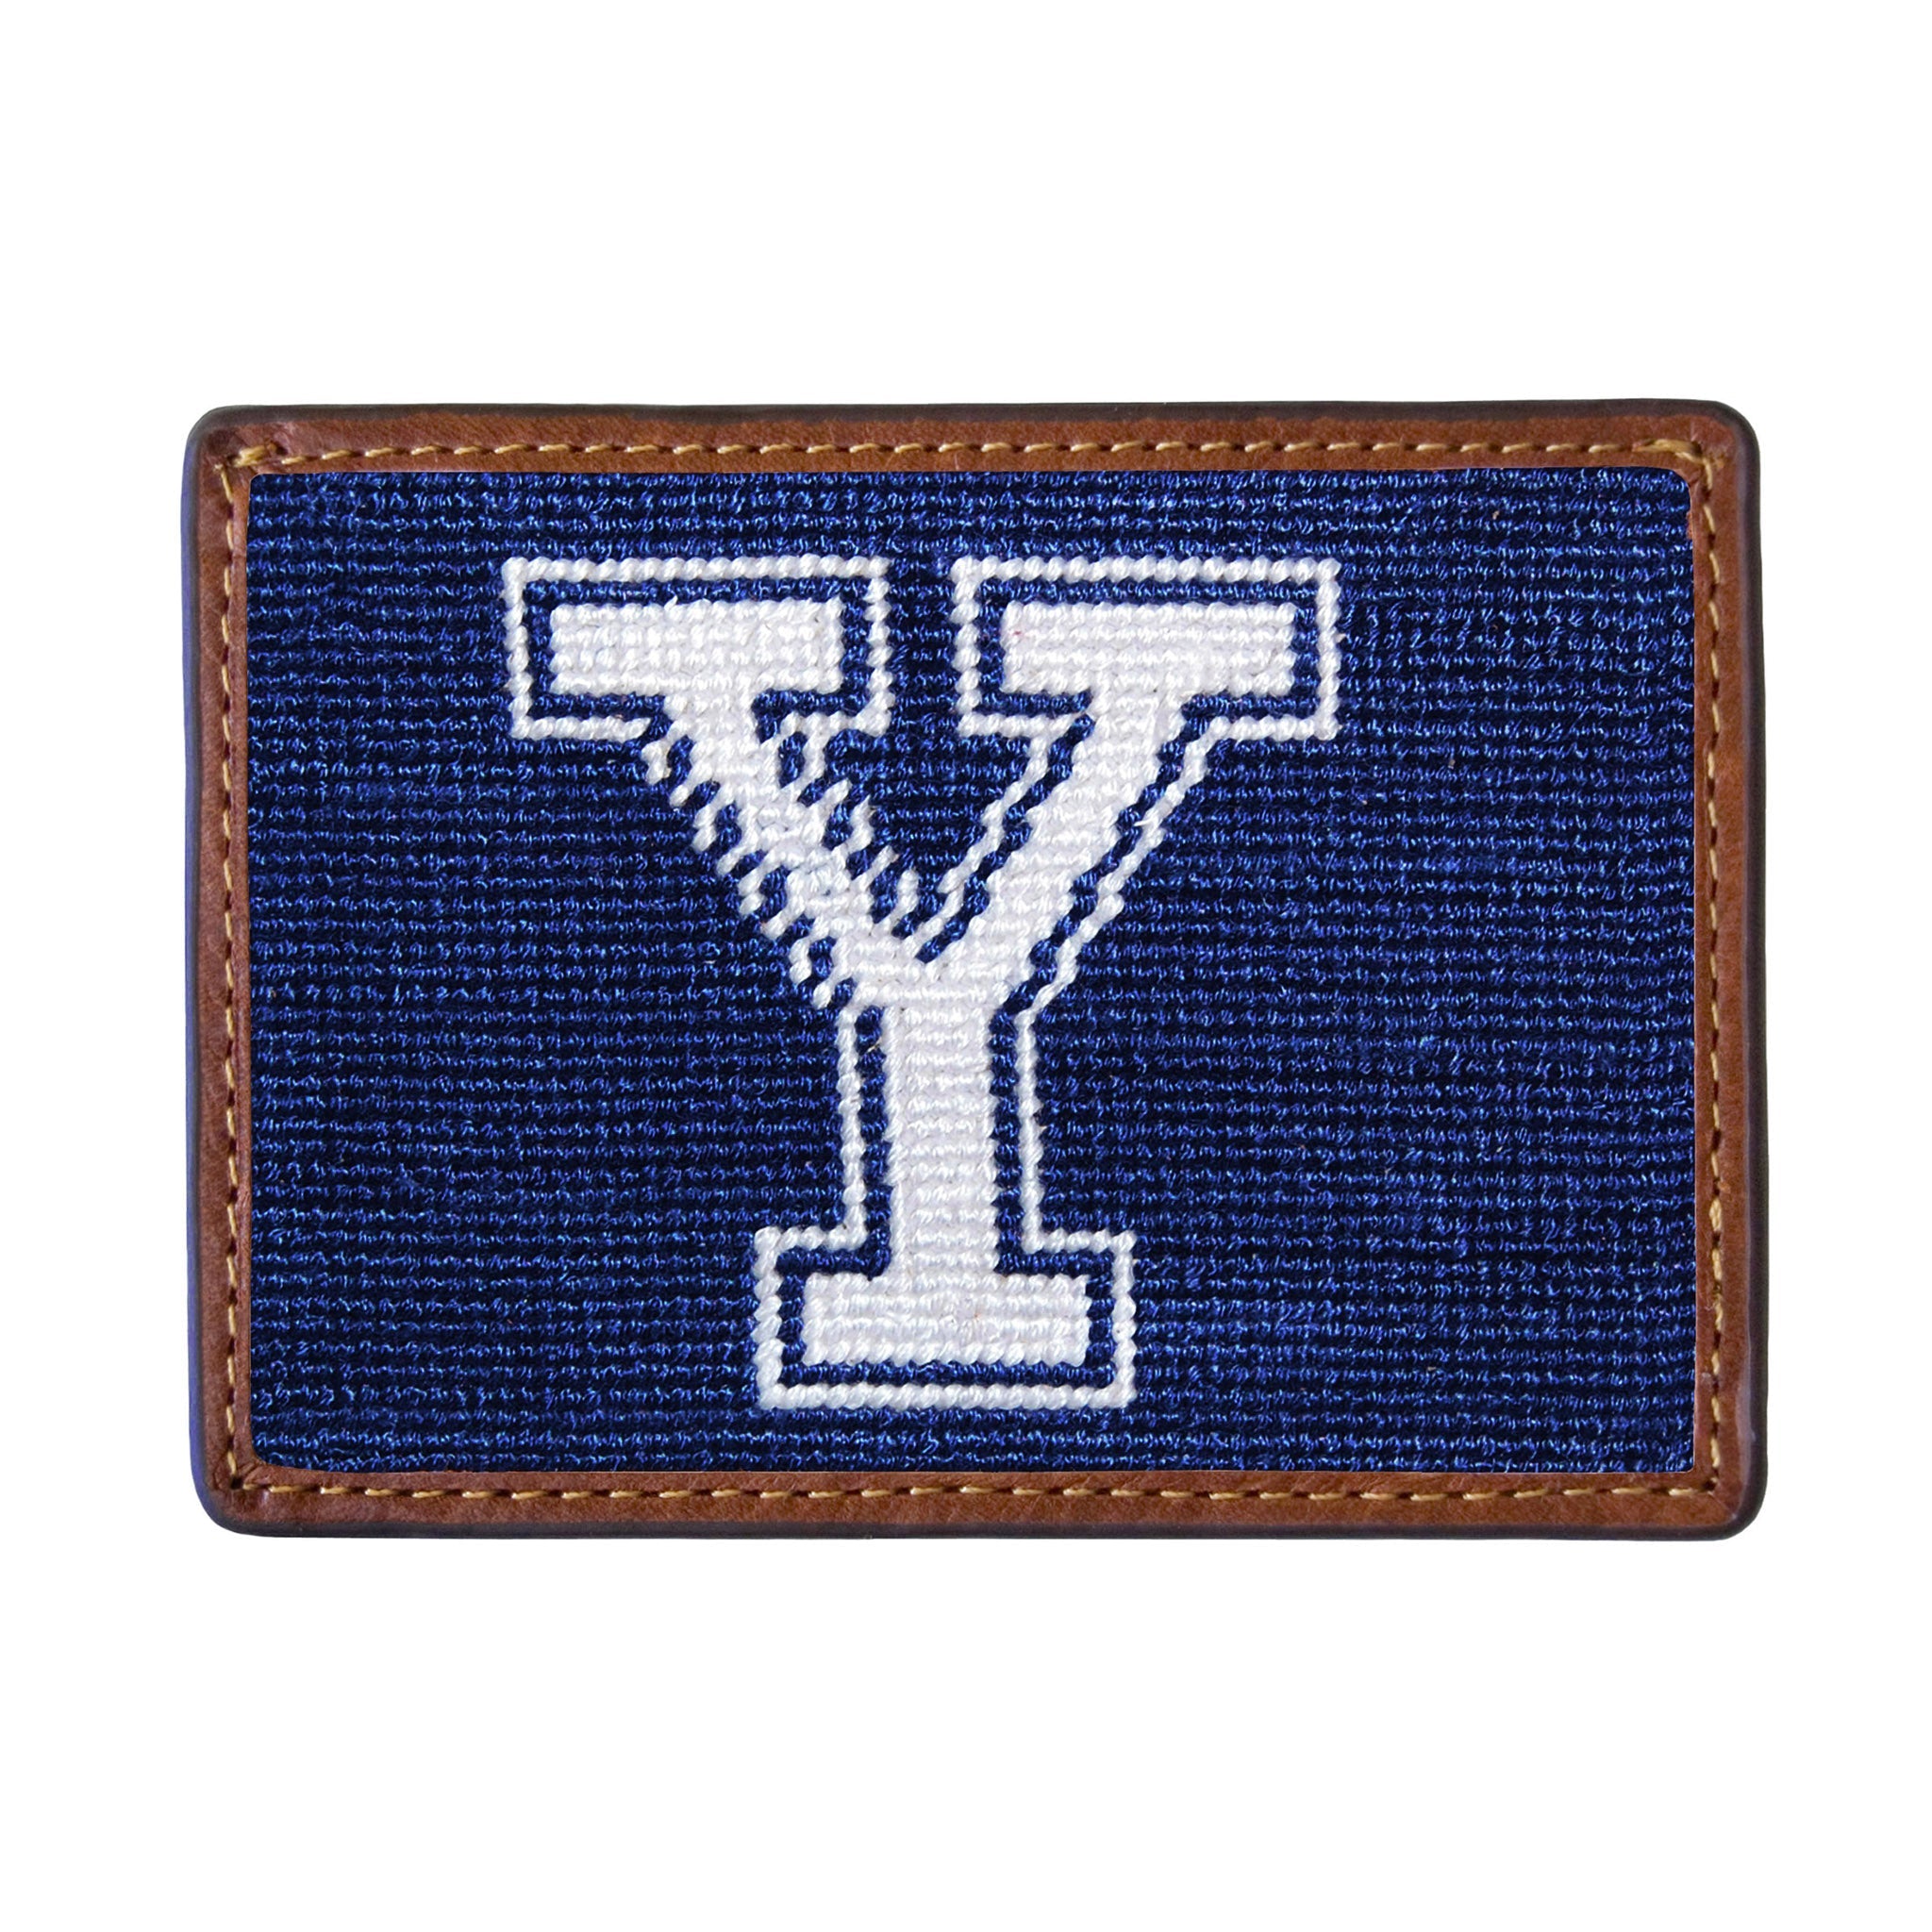 Smathers and Branson Yale Needlepoint Credit Card Wallet Front side